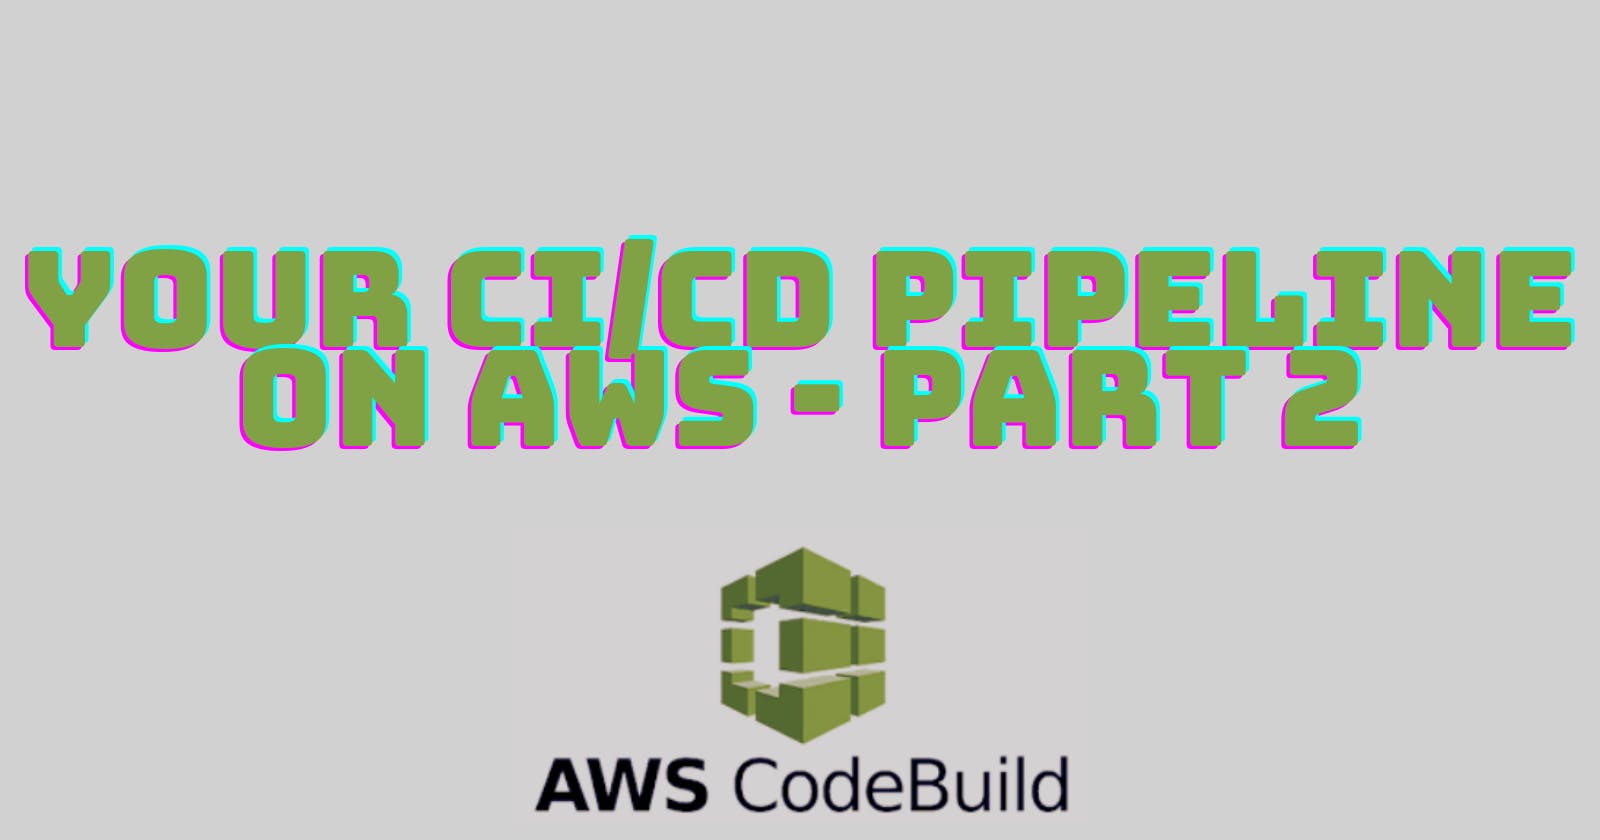 Your CI/CD pipeline on AWS - Part 2